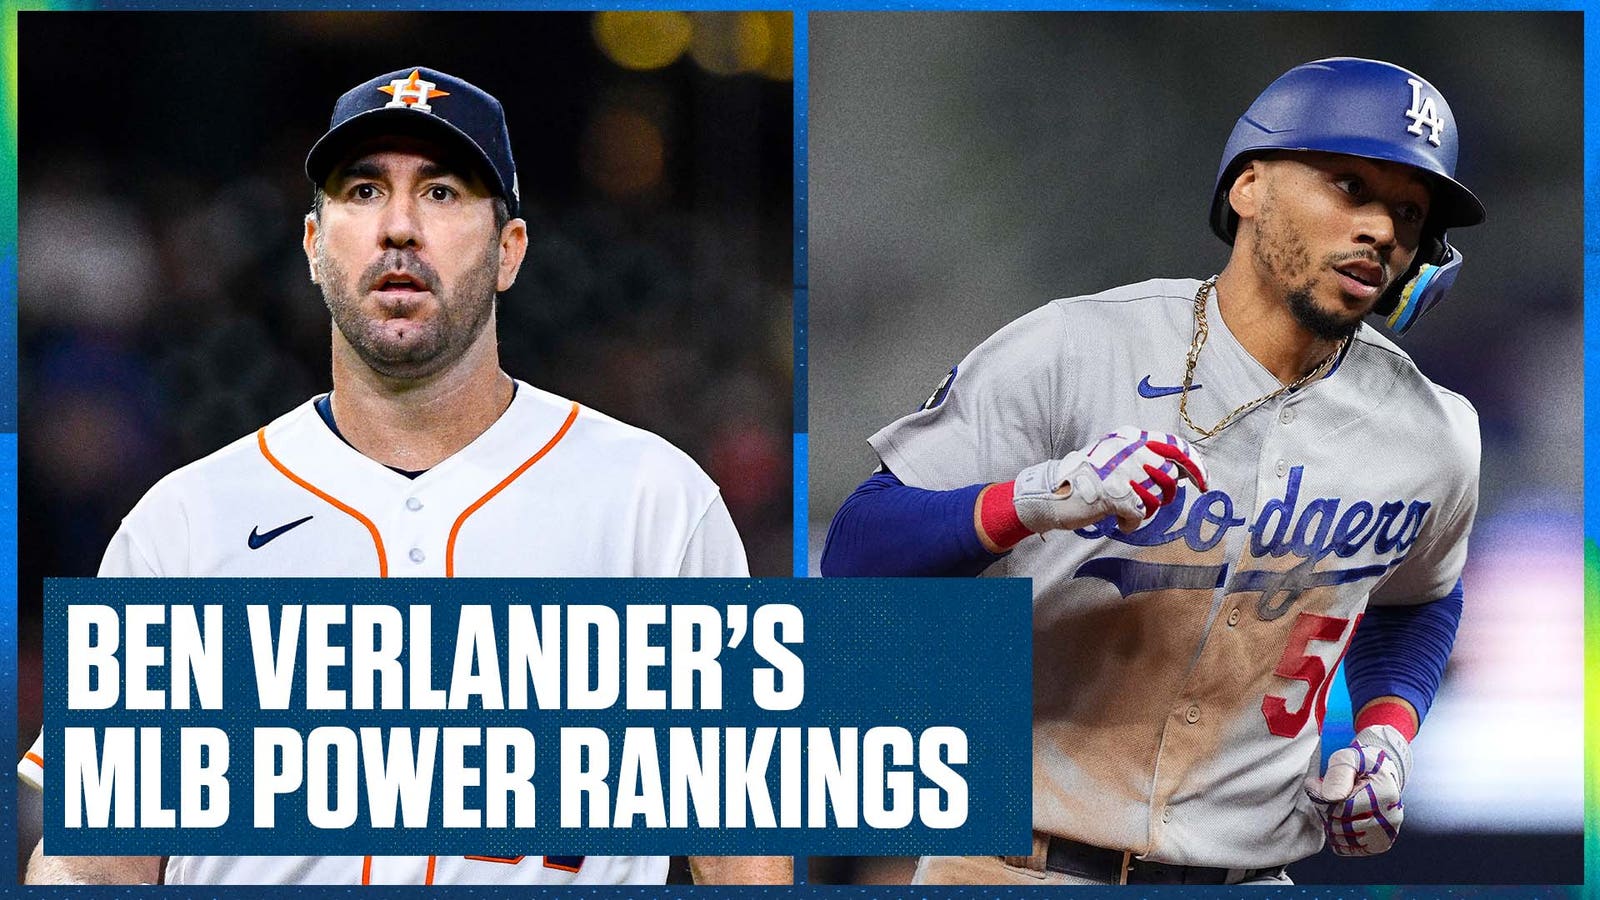 MLB Power Rankings: Houston Astros and the Dodgers stay on top